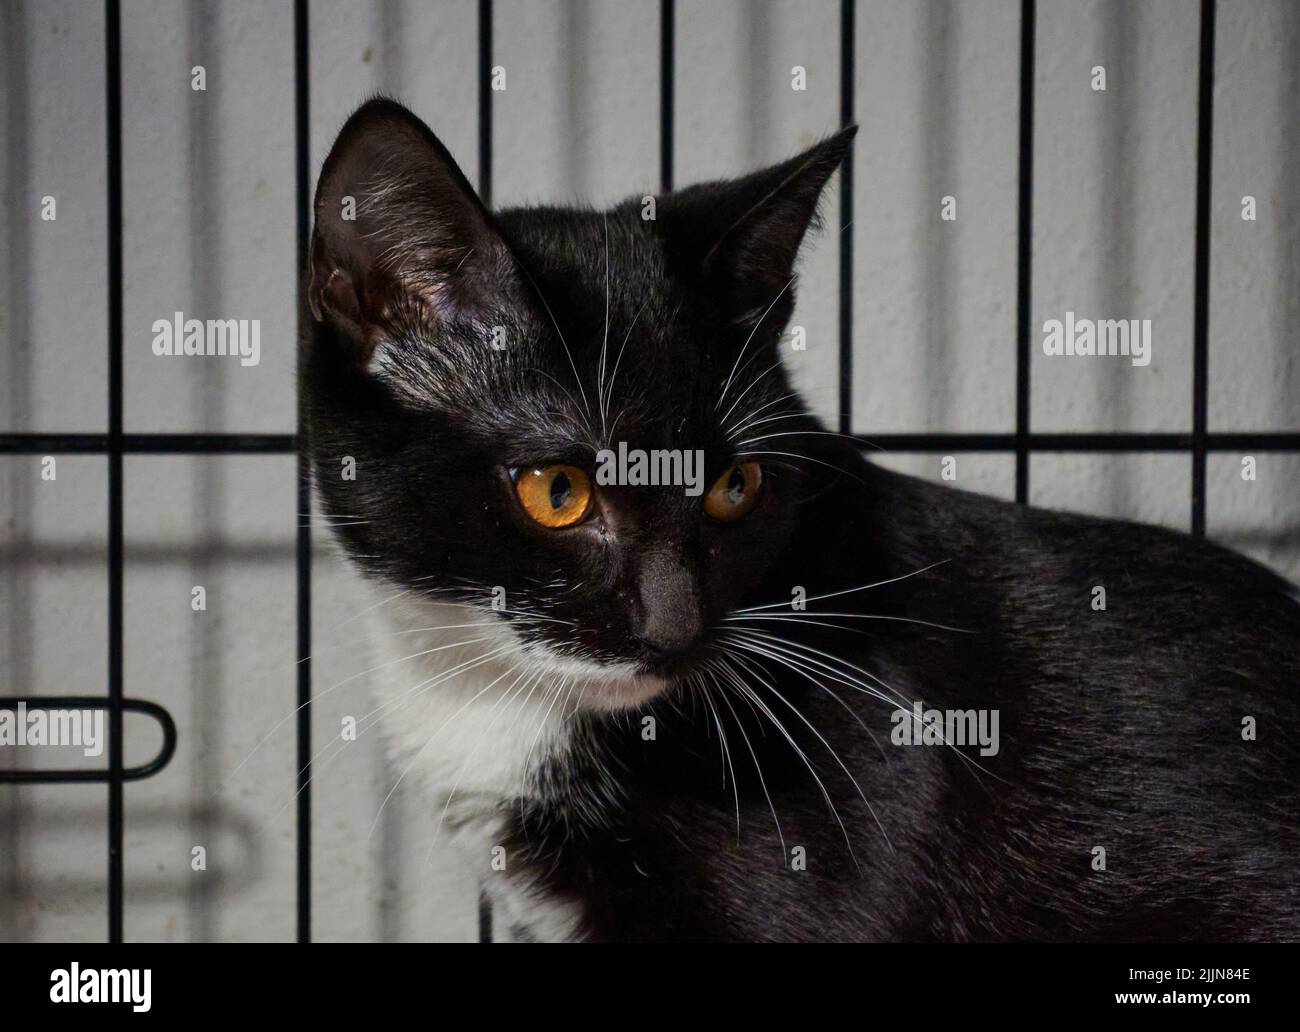 A close-up shot of a beautiful shorthair black and white cat sitting in the cage and looking away Stock Photo